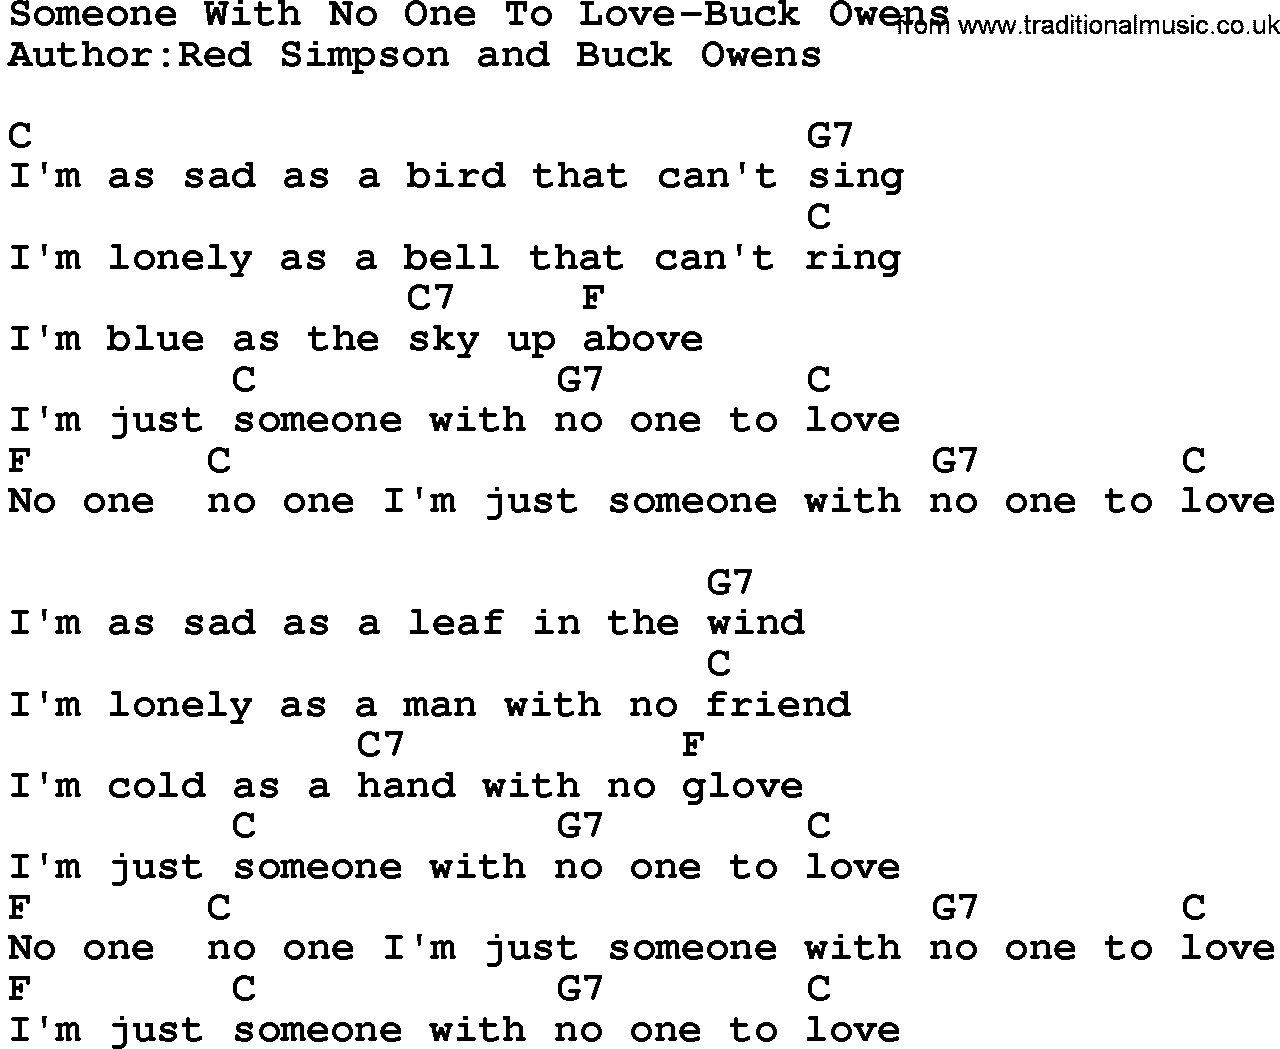 Country music song: Someone With No One To Love-Buck Owens lyrics and chords